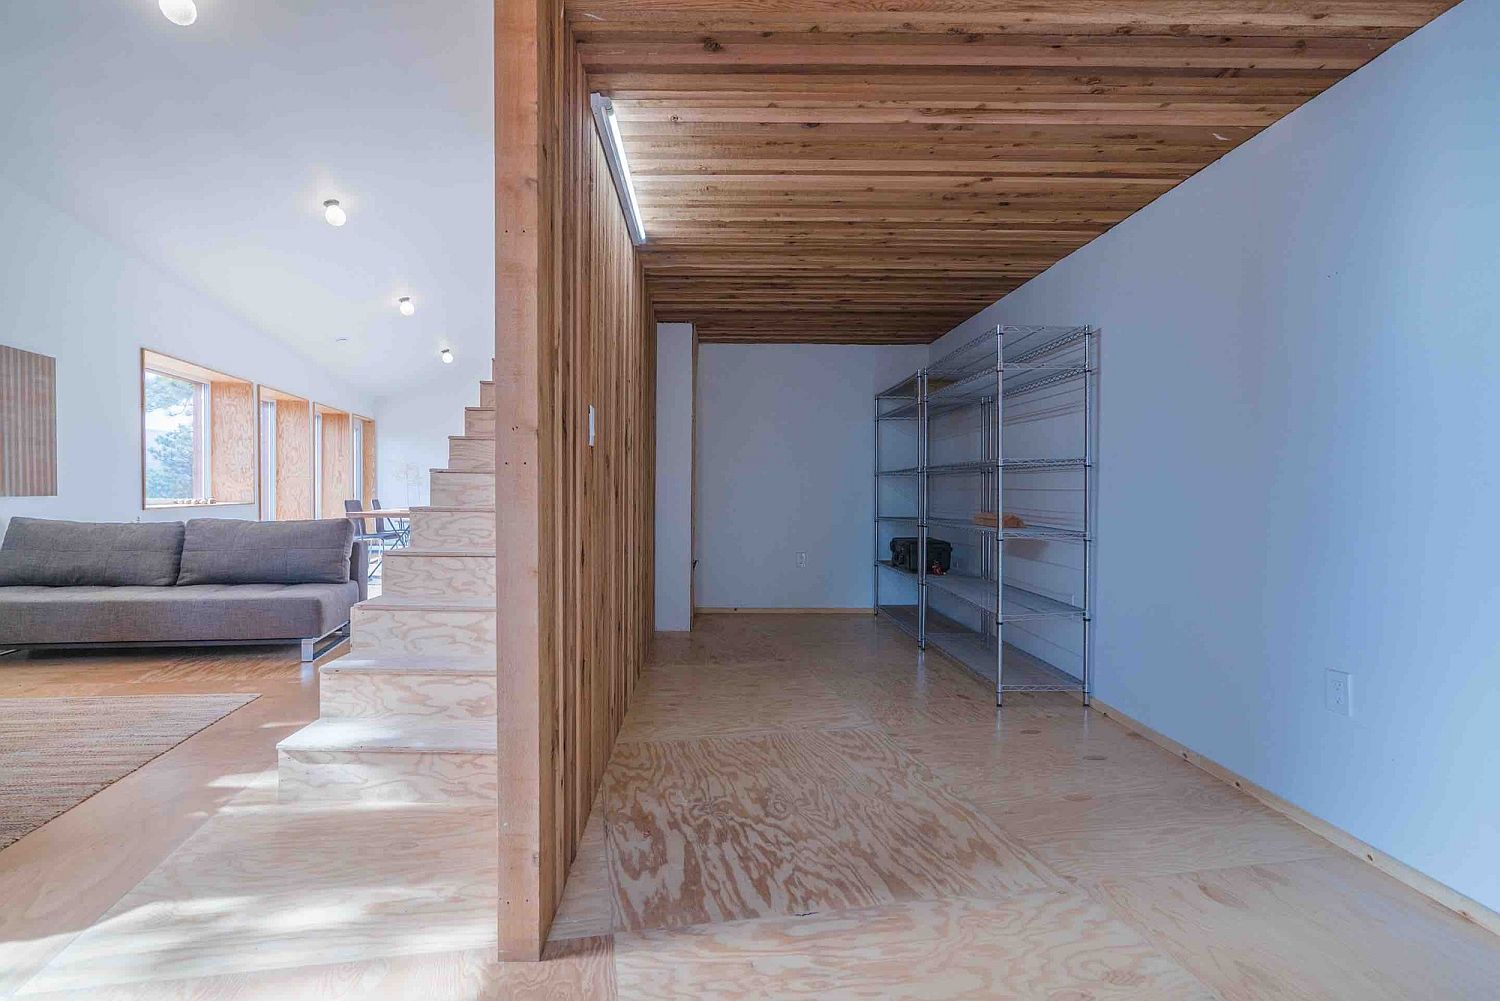 Minimal-and-cozy-interior-clad-in-FSC-plywood-cedar-and-tile